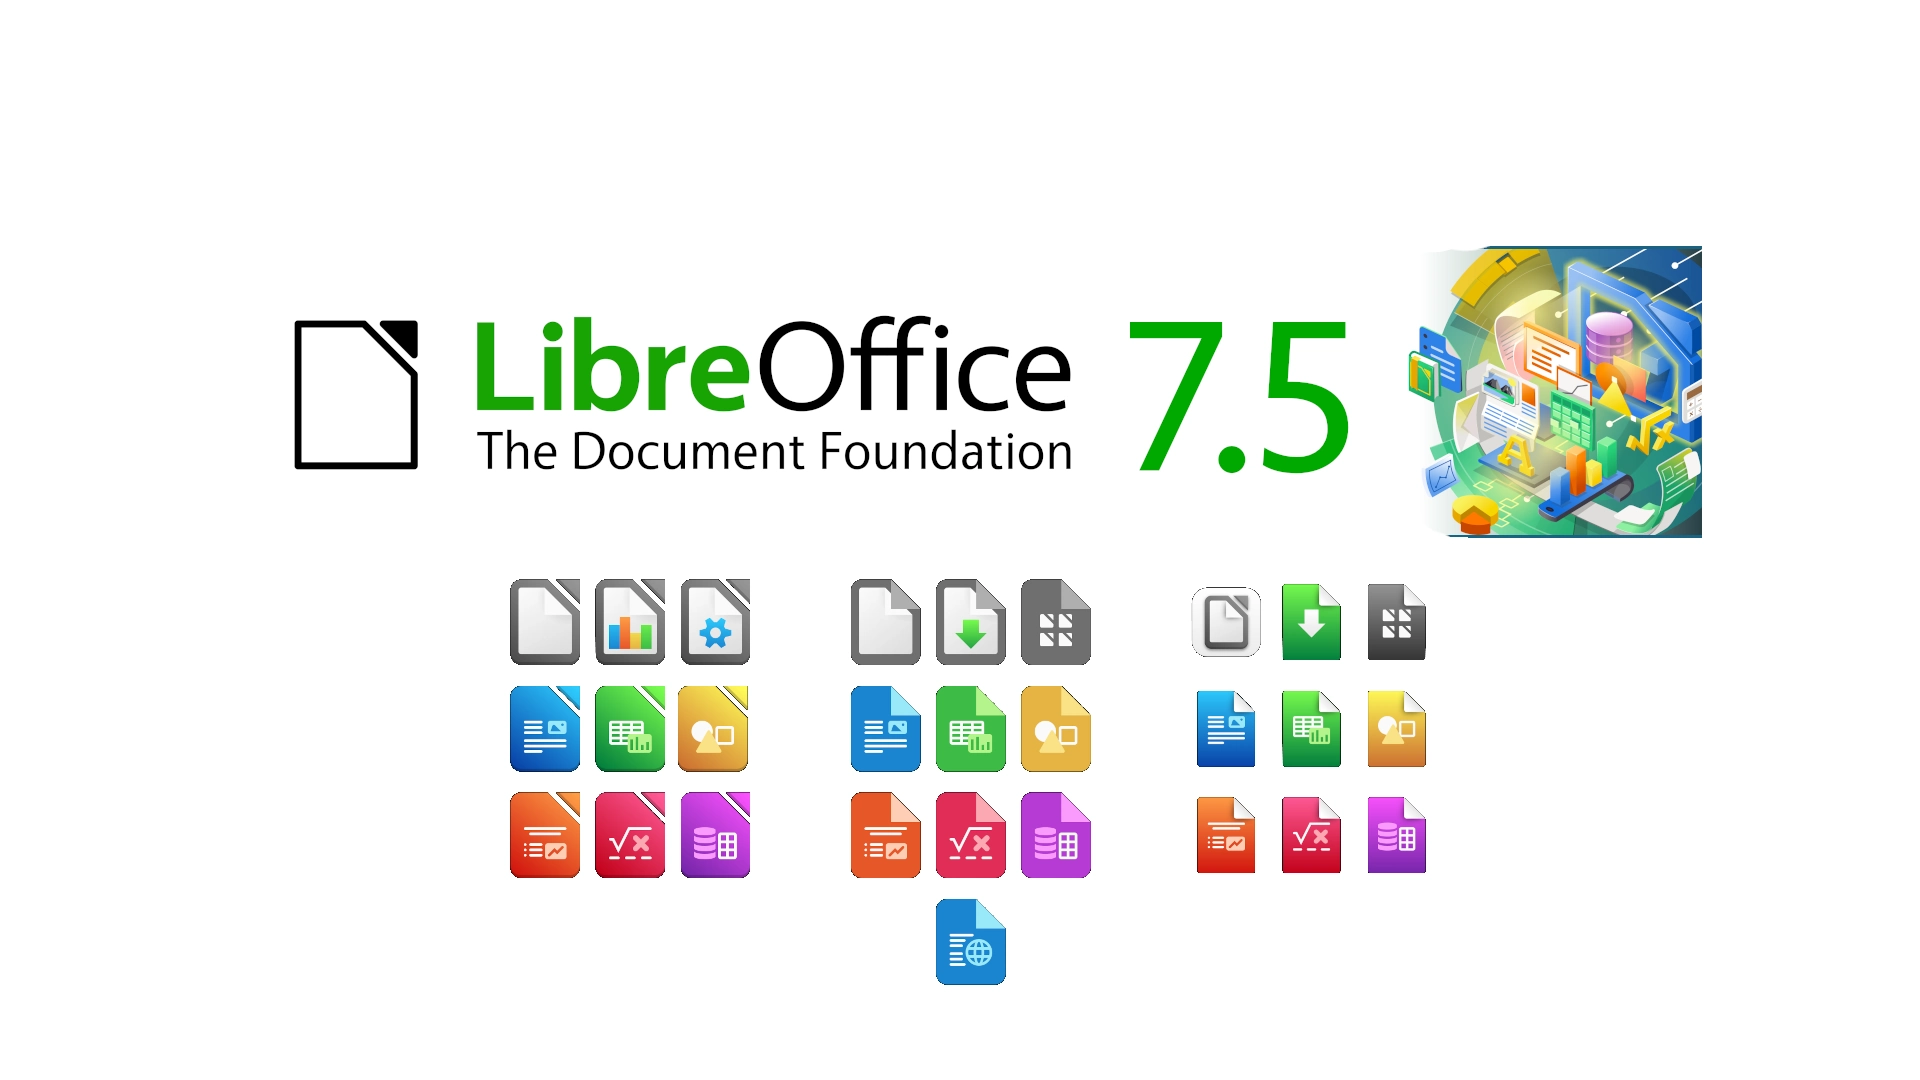 LibreOffice 7.5.4 Office Suite Released with More Than 80 Bug Fixes